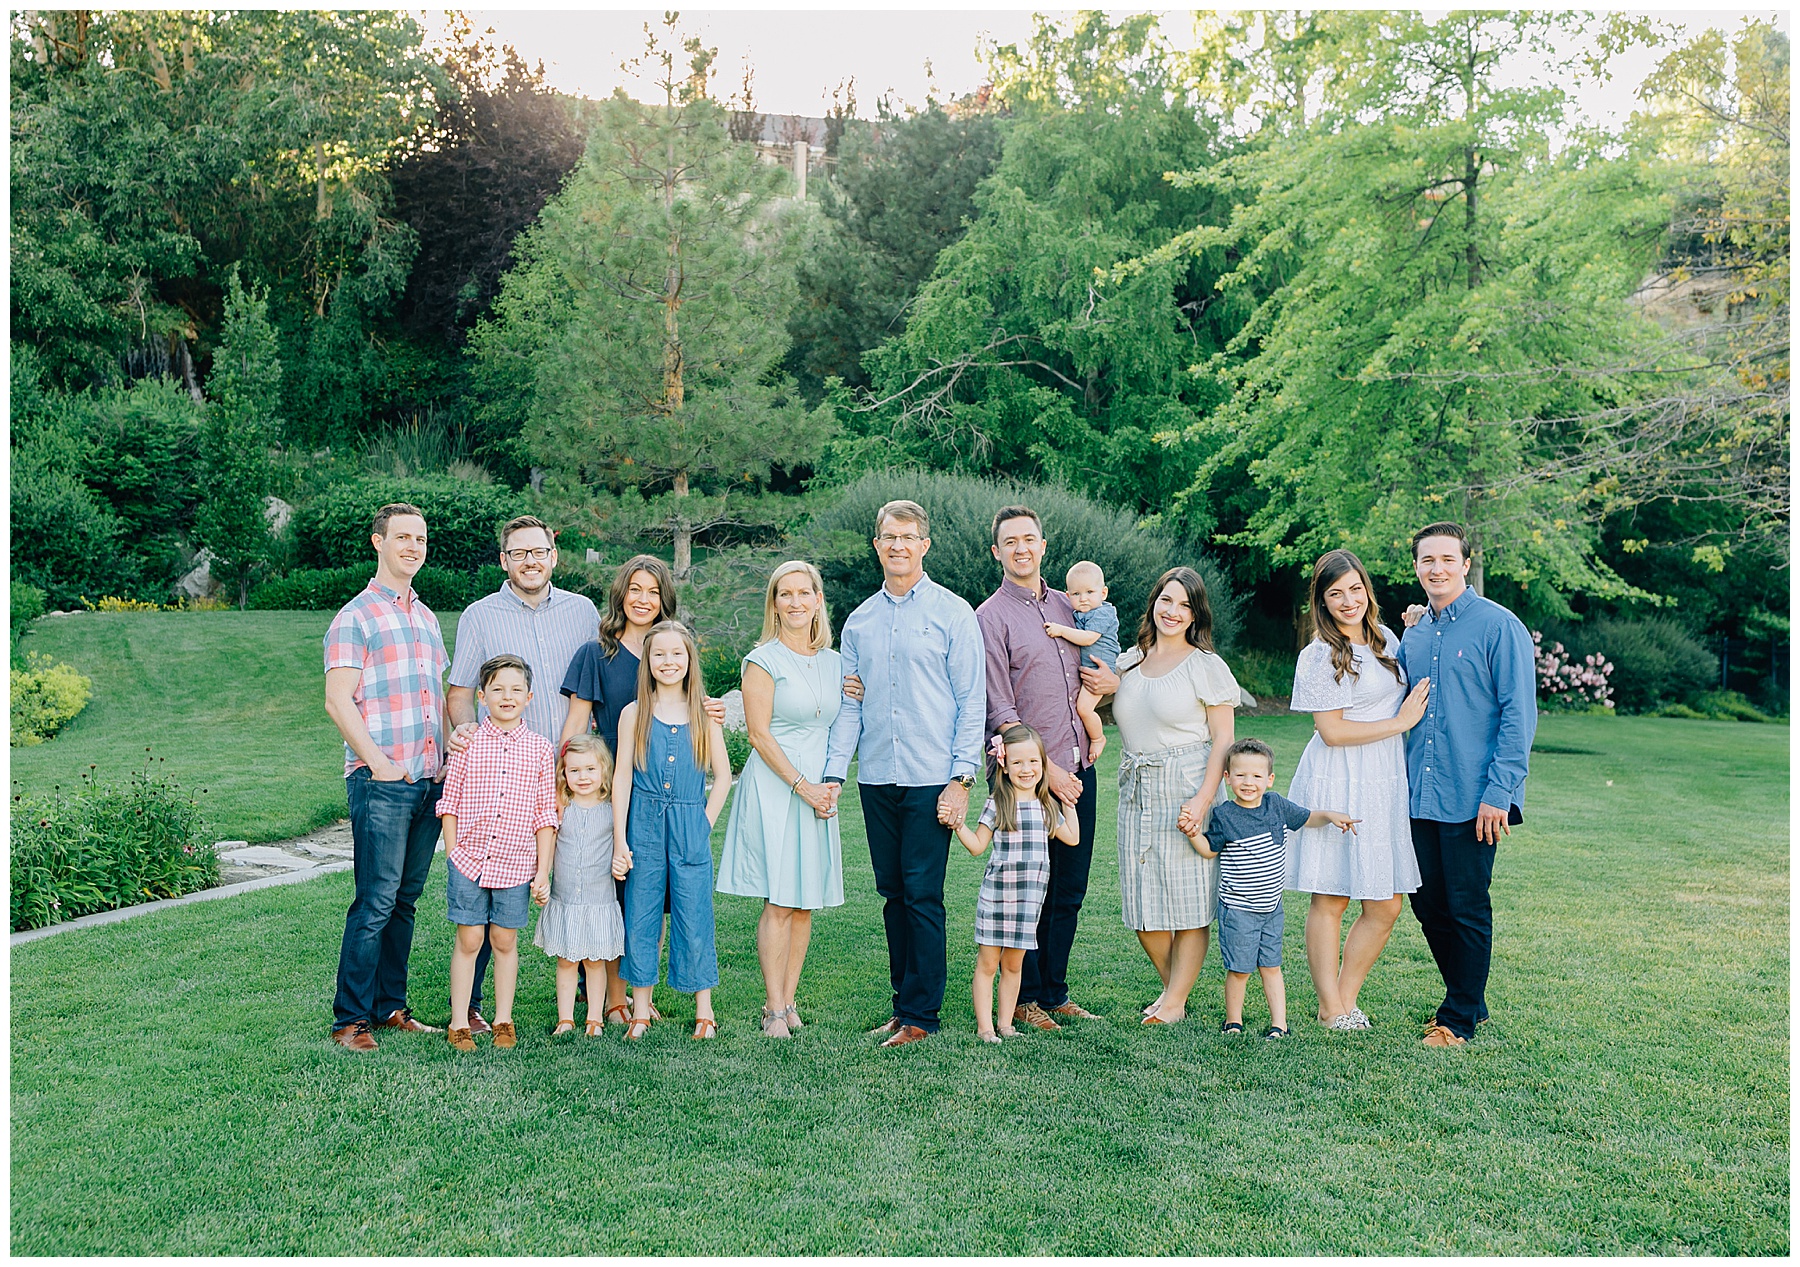 Rogers | Extended Family Pictures | Qualtrics GardensRogers | Extended Family Pictures | Qualitrics Gardens